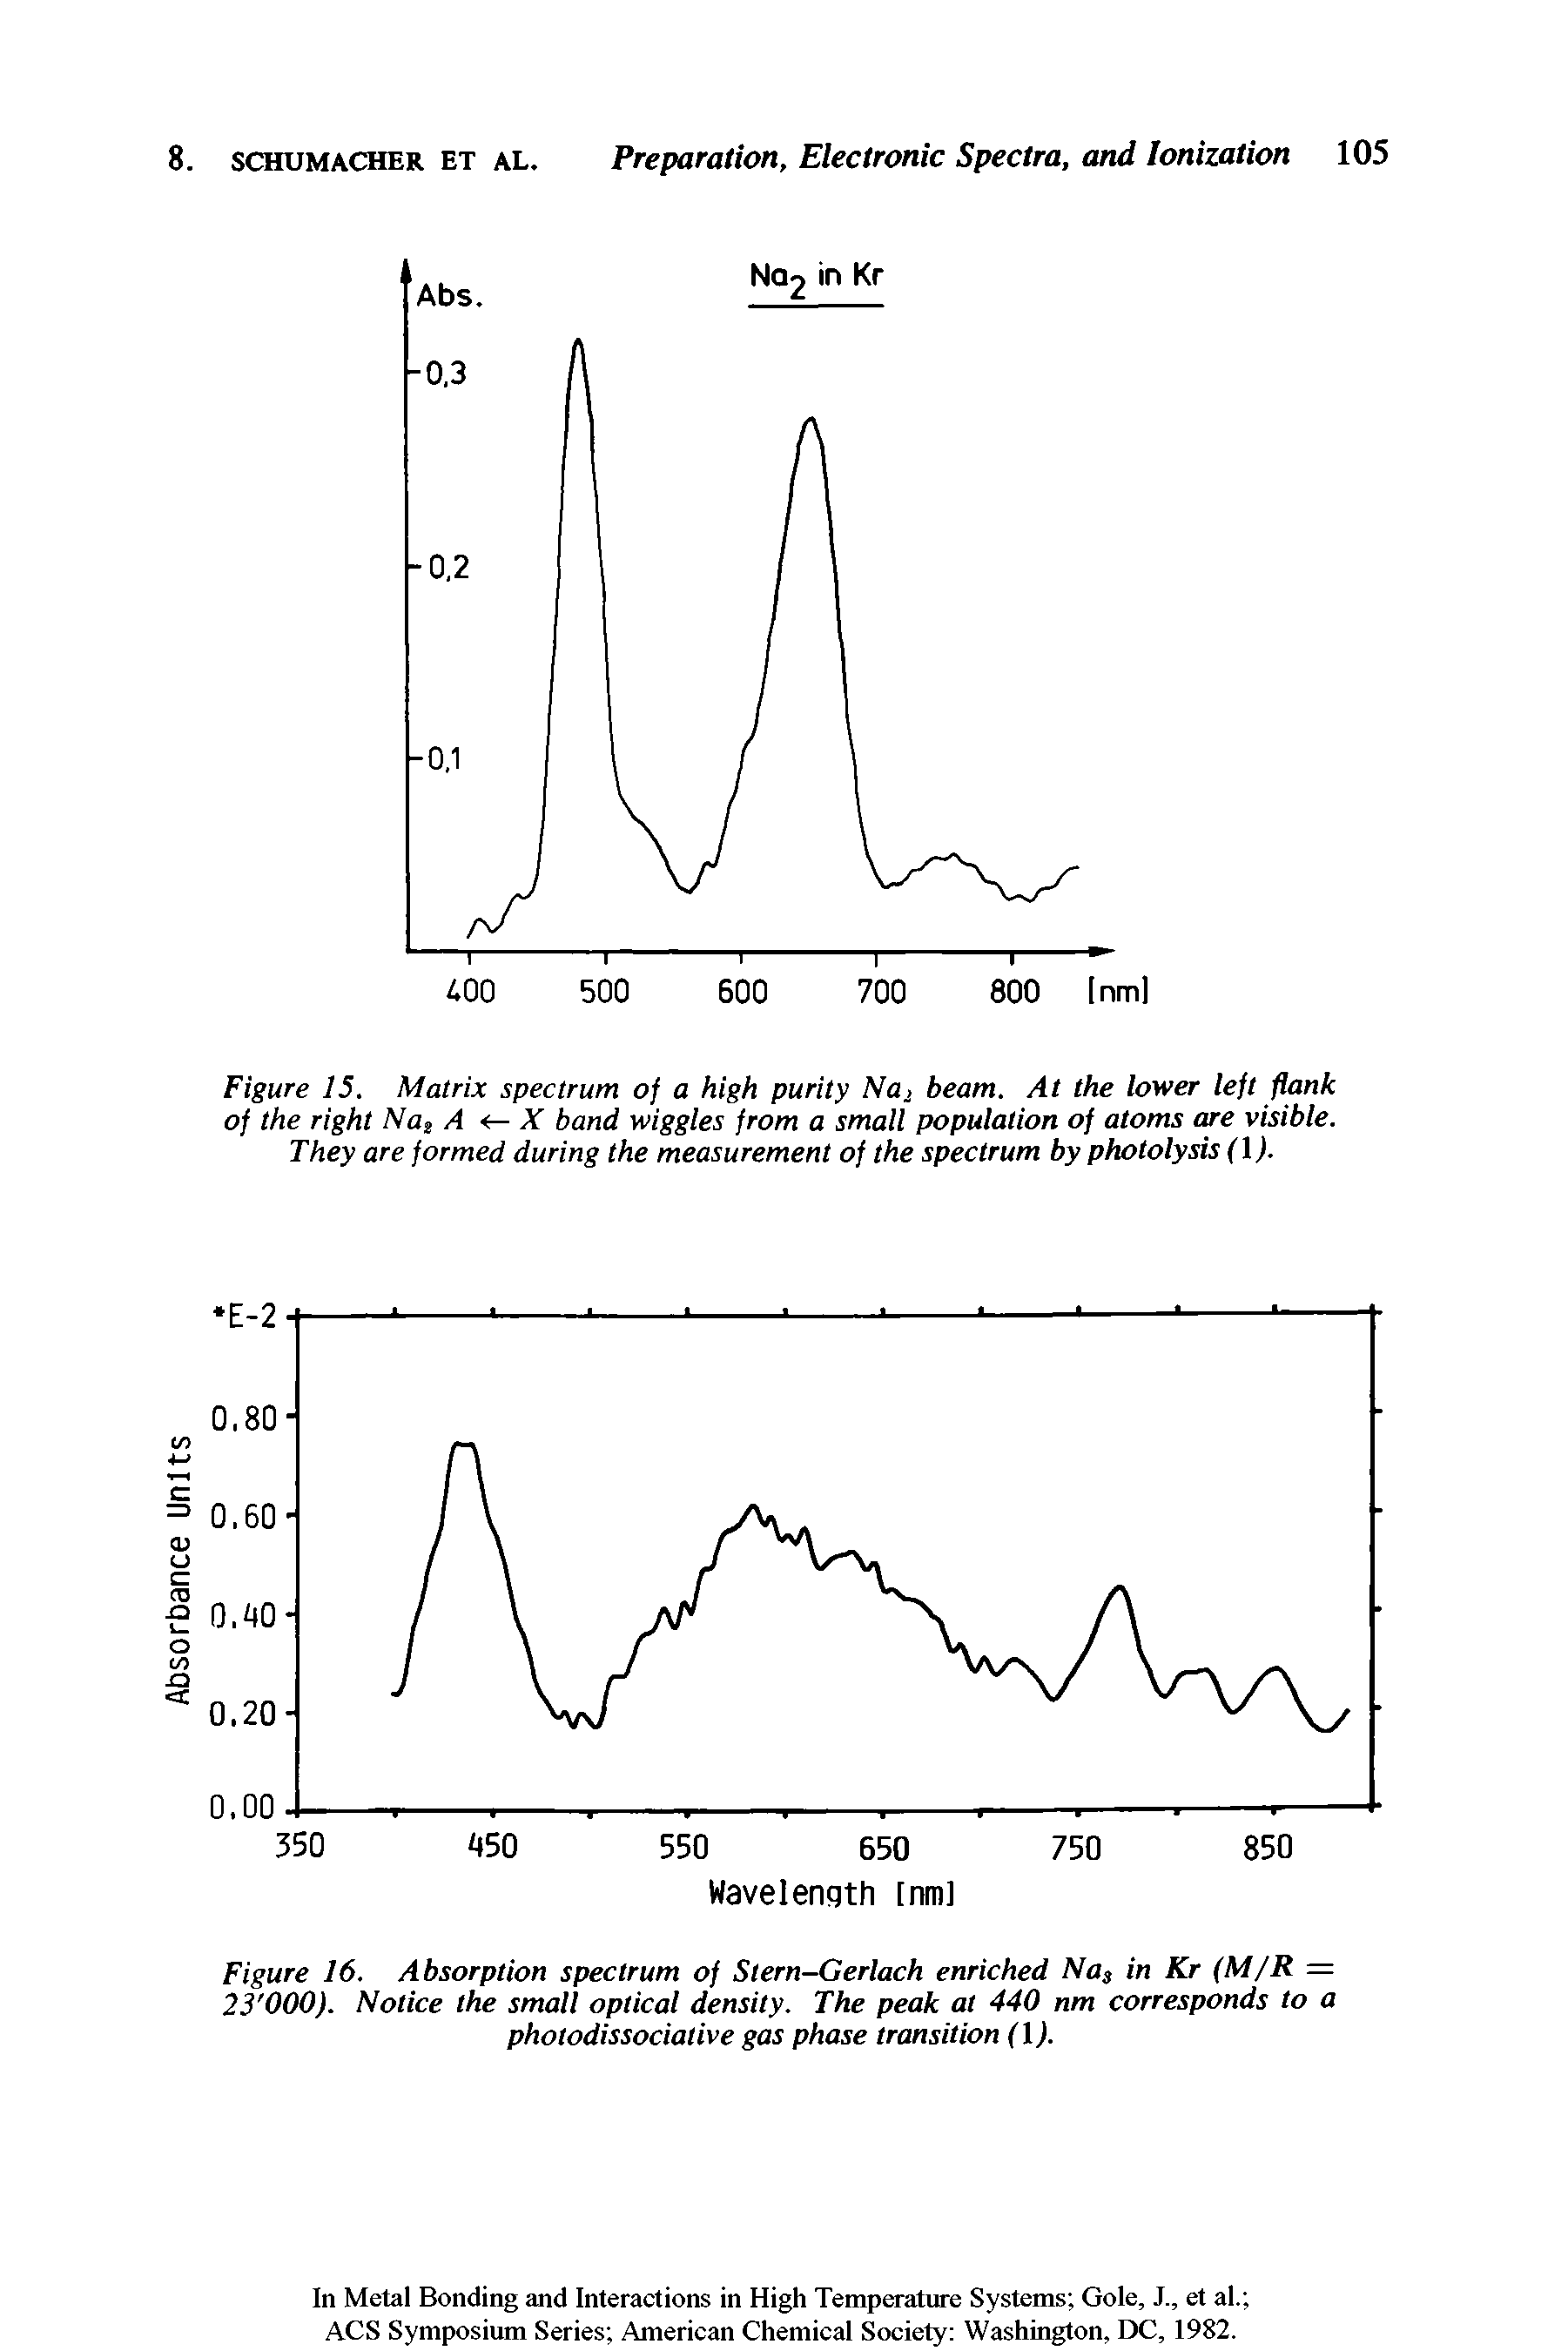 Figure 15. Matrix spectrum of a high purity Na beam. At the lower left flank of the right Nai A <— X band wiggles from a small population of atoms are visible. They are formed during the measurement of the spectrum by photolysis (I).